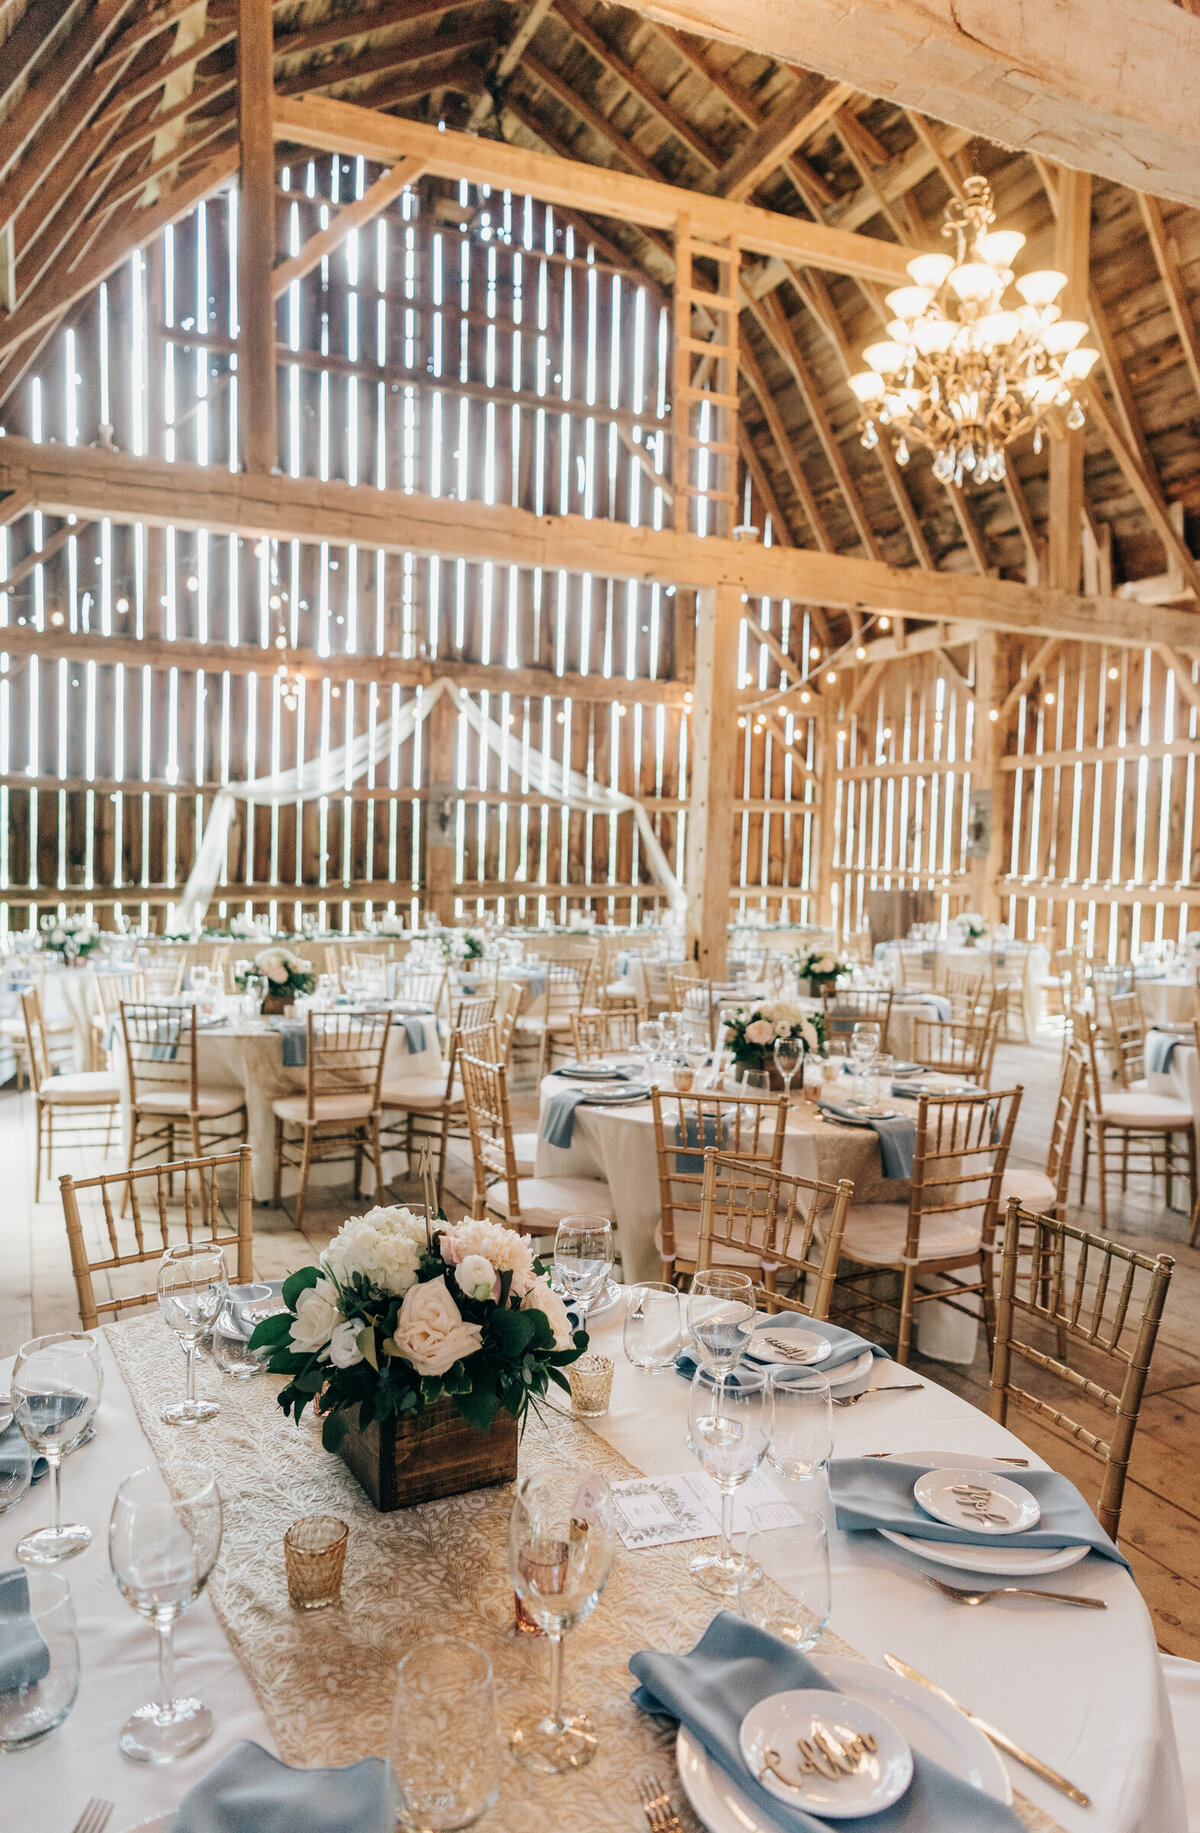 Gorgeous barn reception with white floral centre pieces, and white and blue themed decor